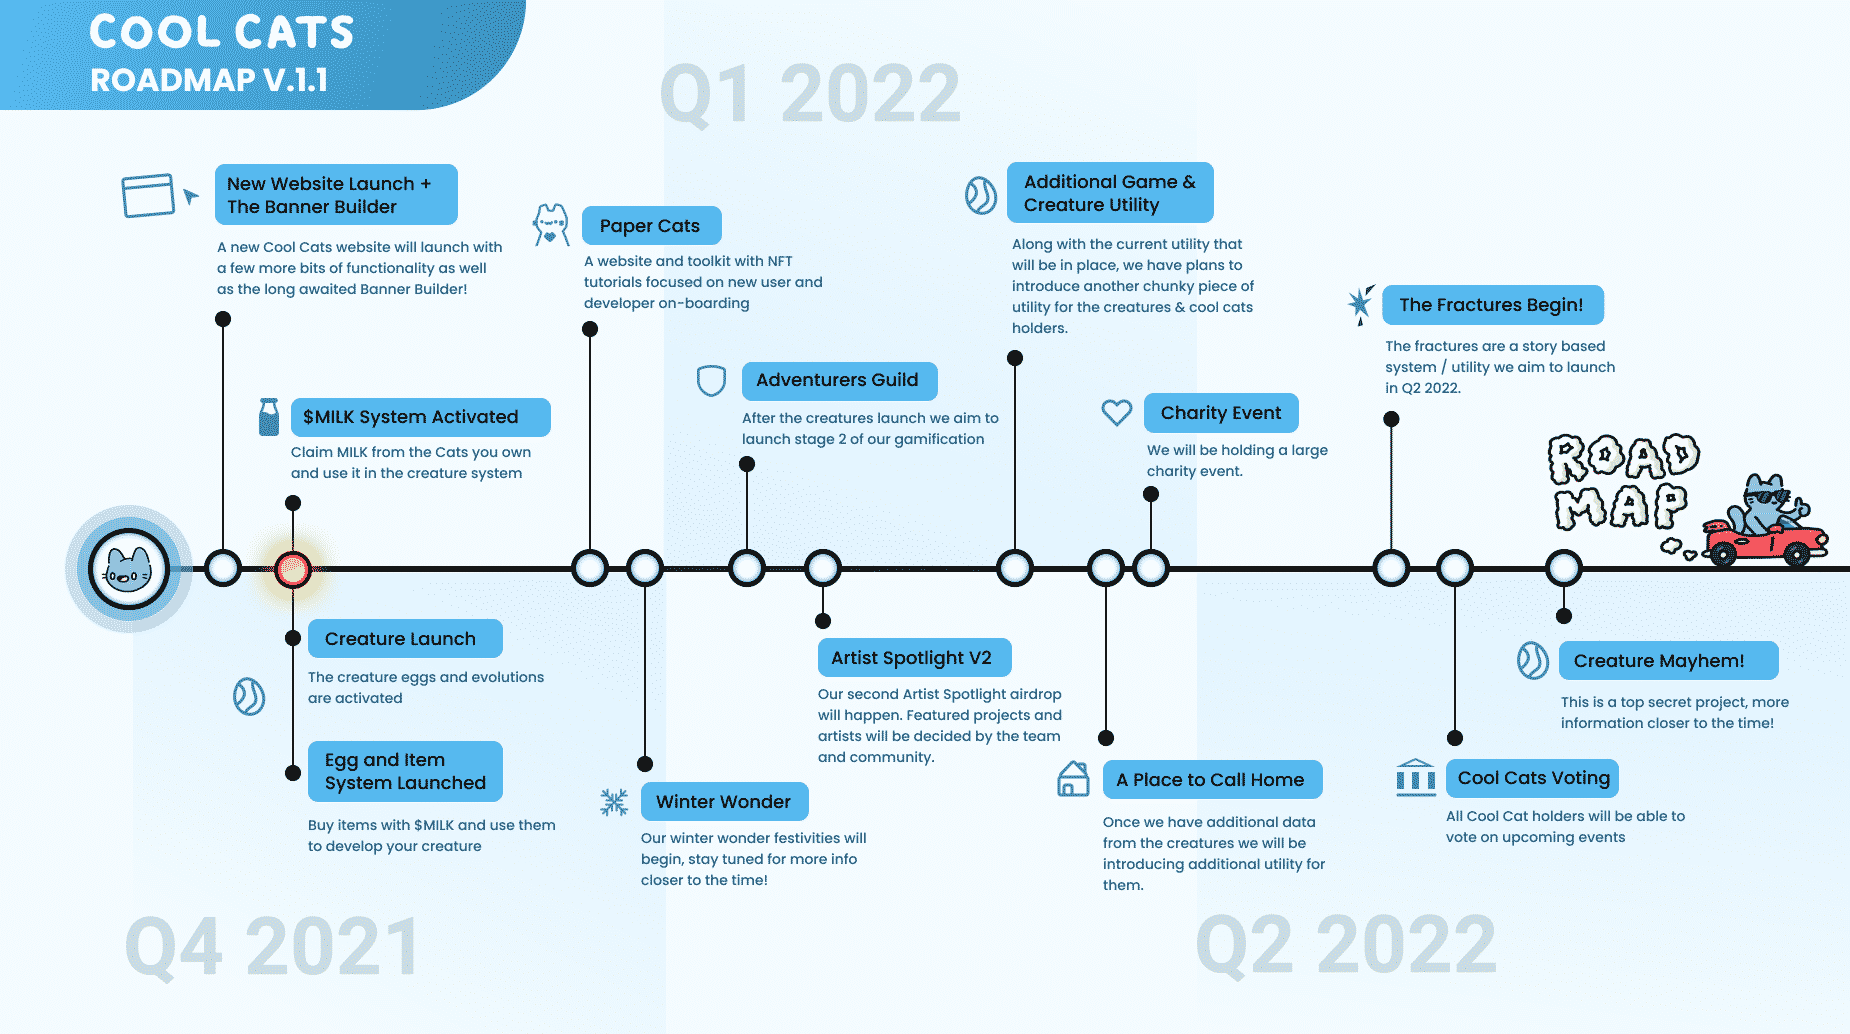 Die Cool Cats Roadmap ab Q4 2021 (Quelle: Cool Cats Discord)